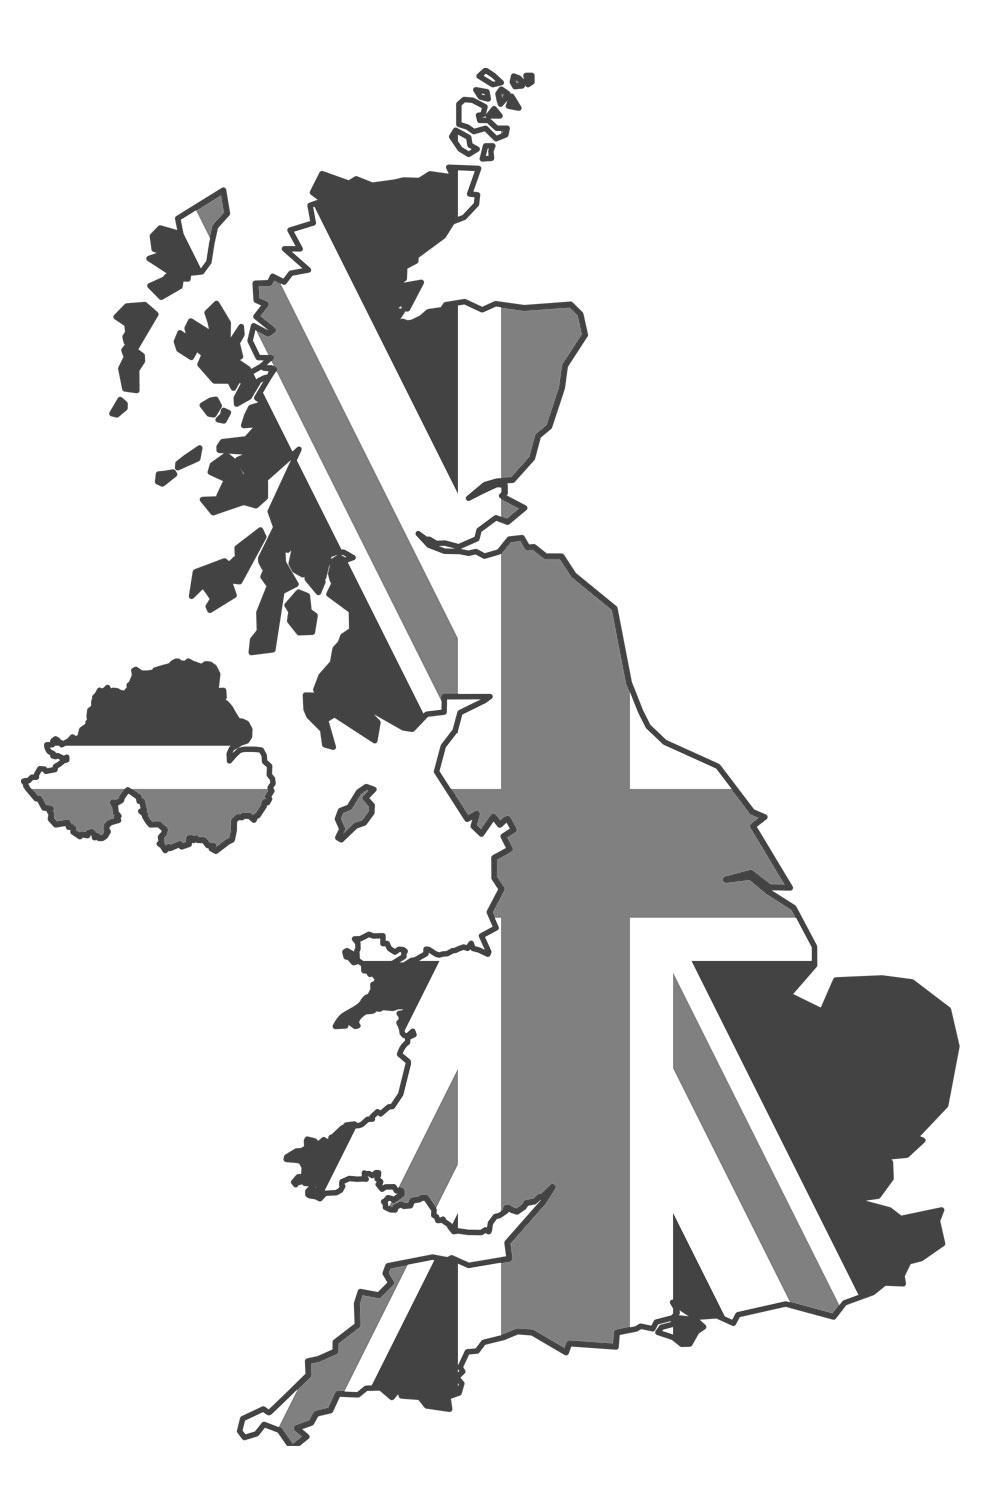 Meet your UK mandates with our geography agnostic solutions